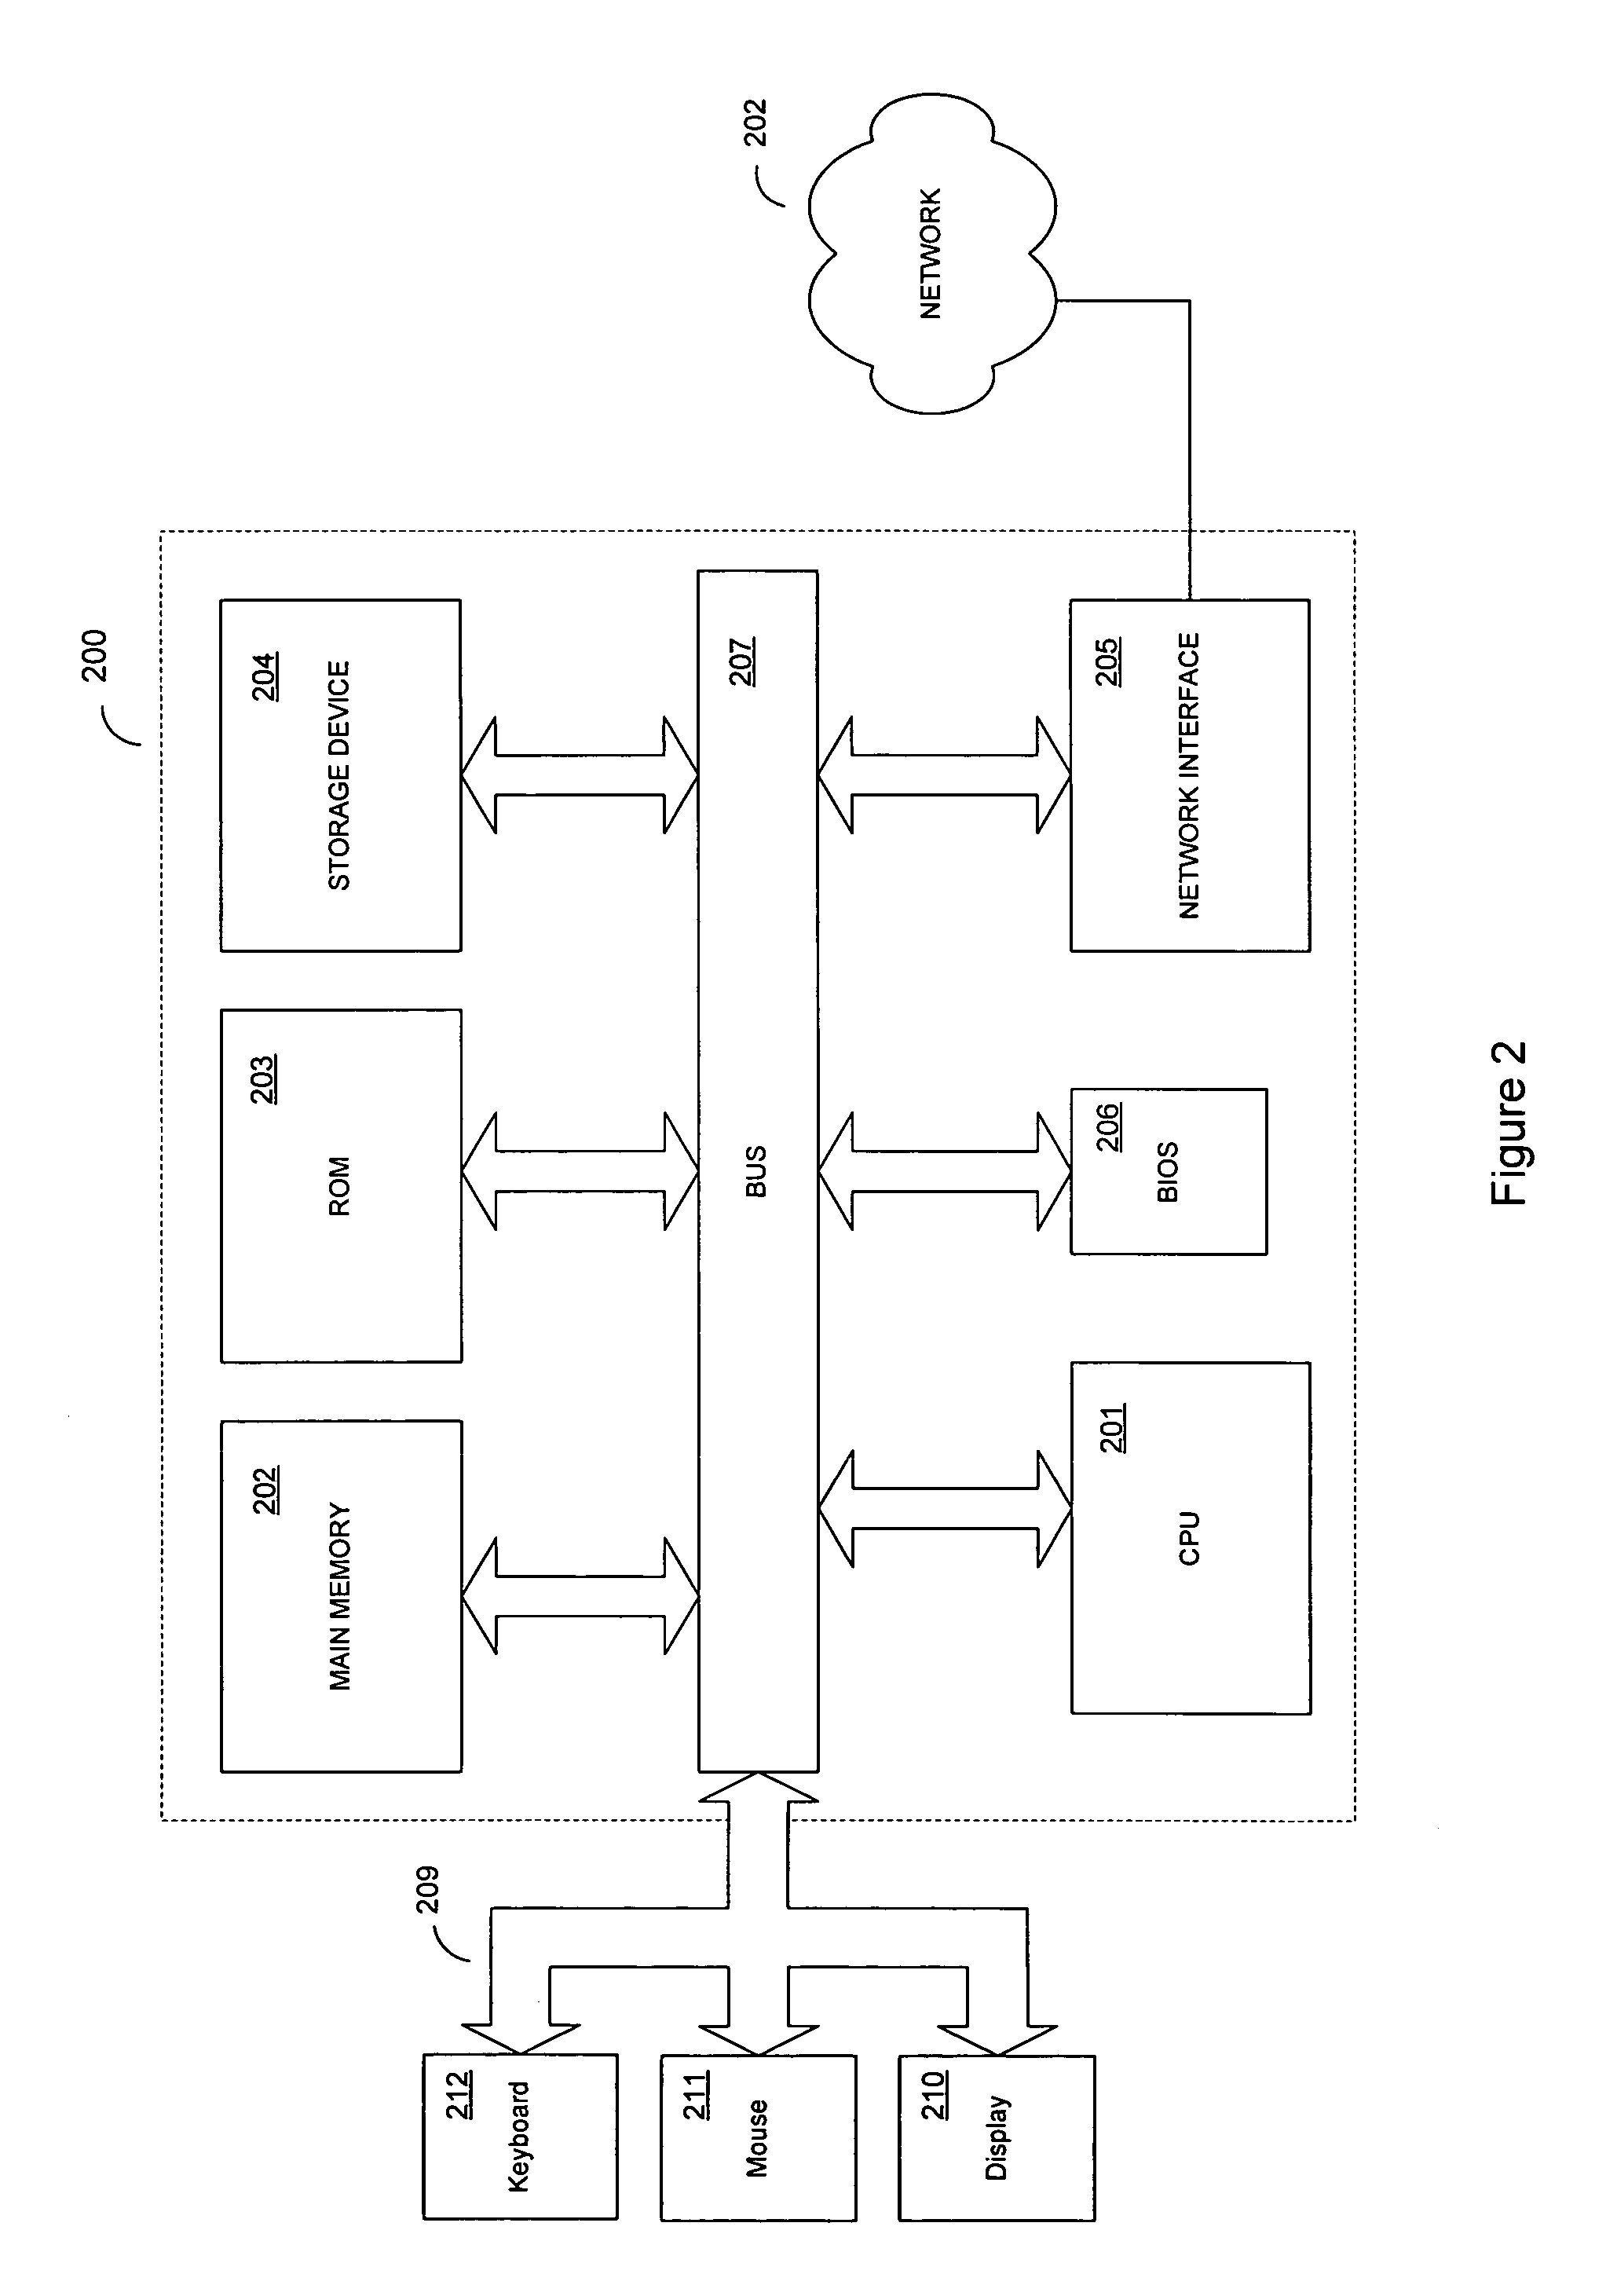 Method and system for provisioning servers based on a policy and rule hierarchy